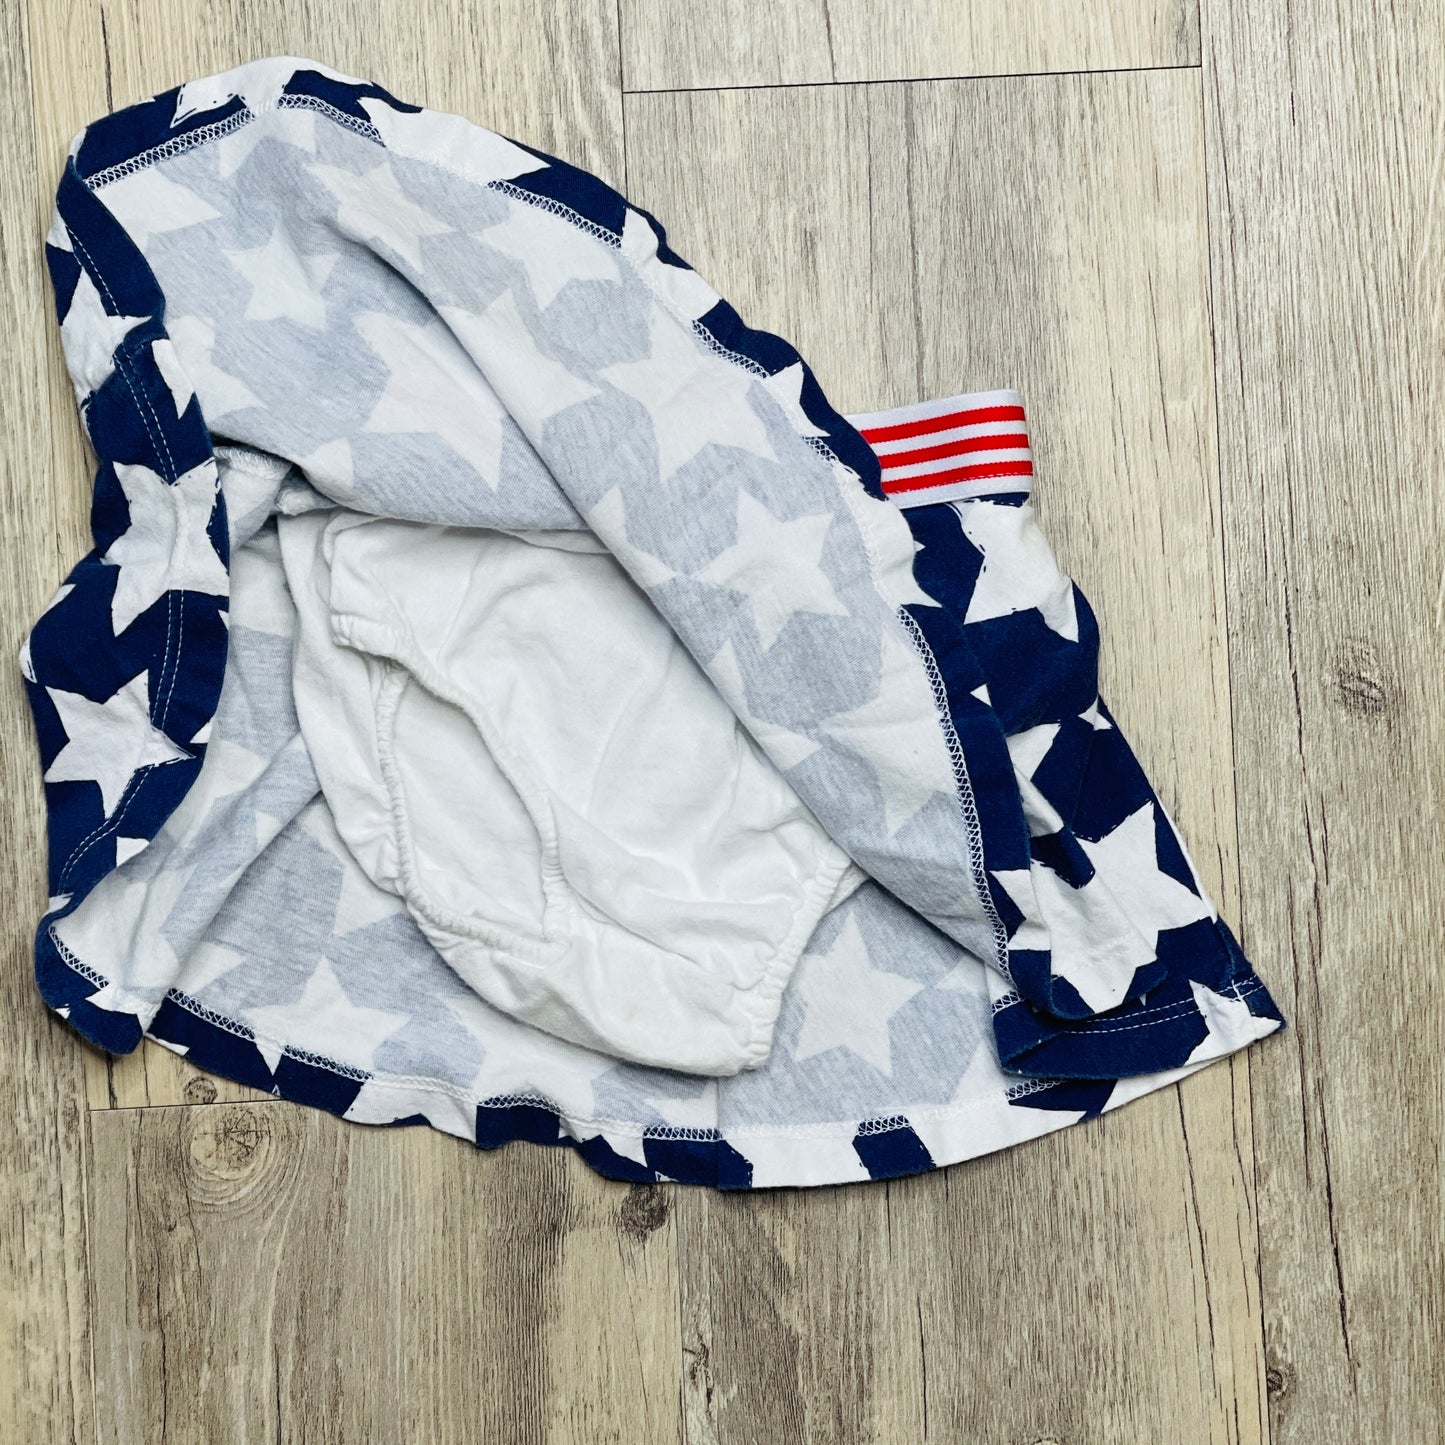 Stars and Stripes Skirt with Underwear - 18 Months